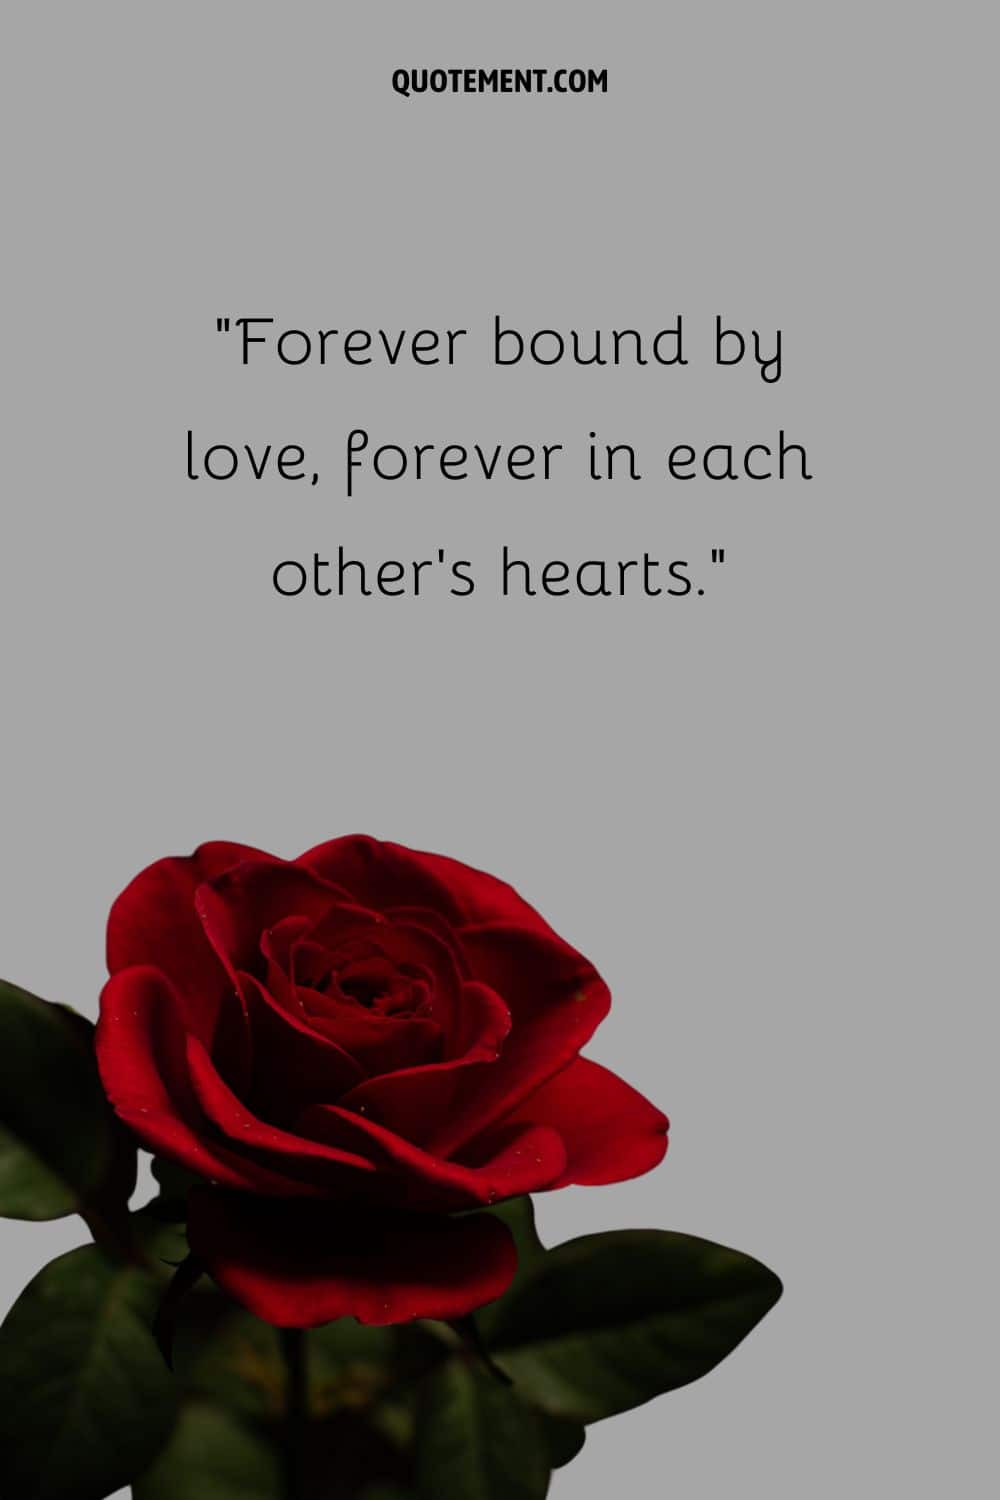 Beautiful rose representing always in our hearts quote